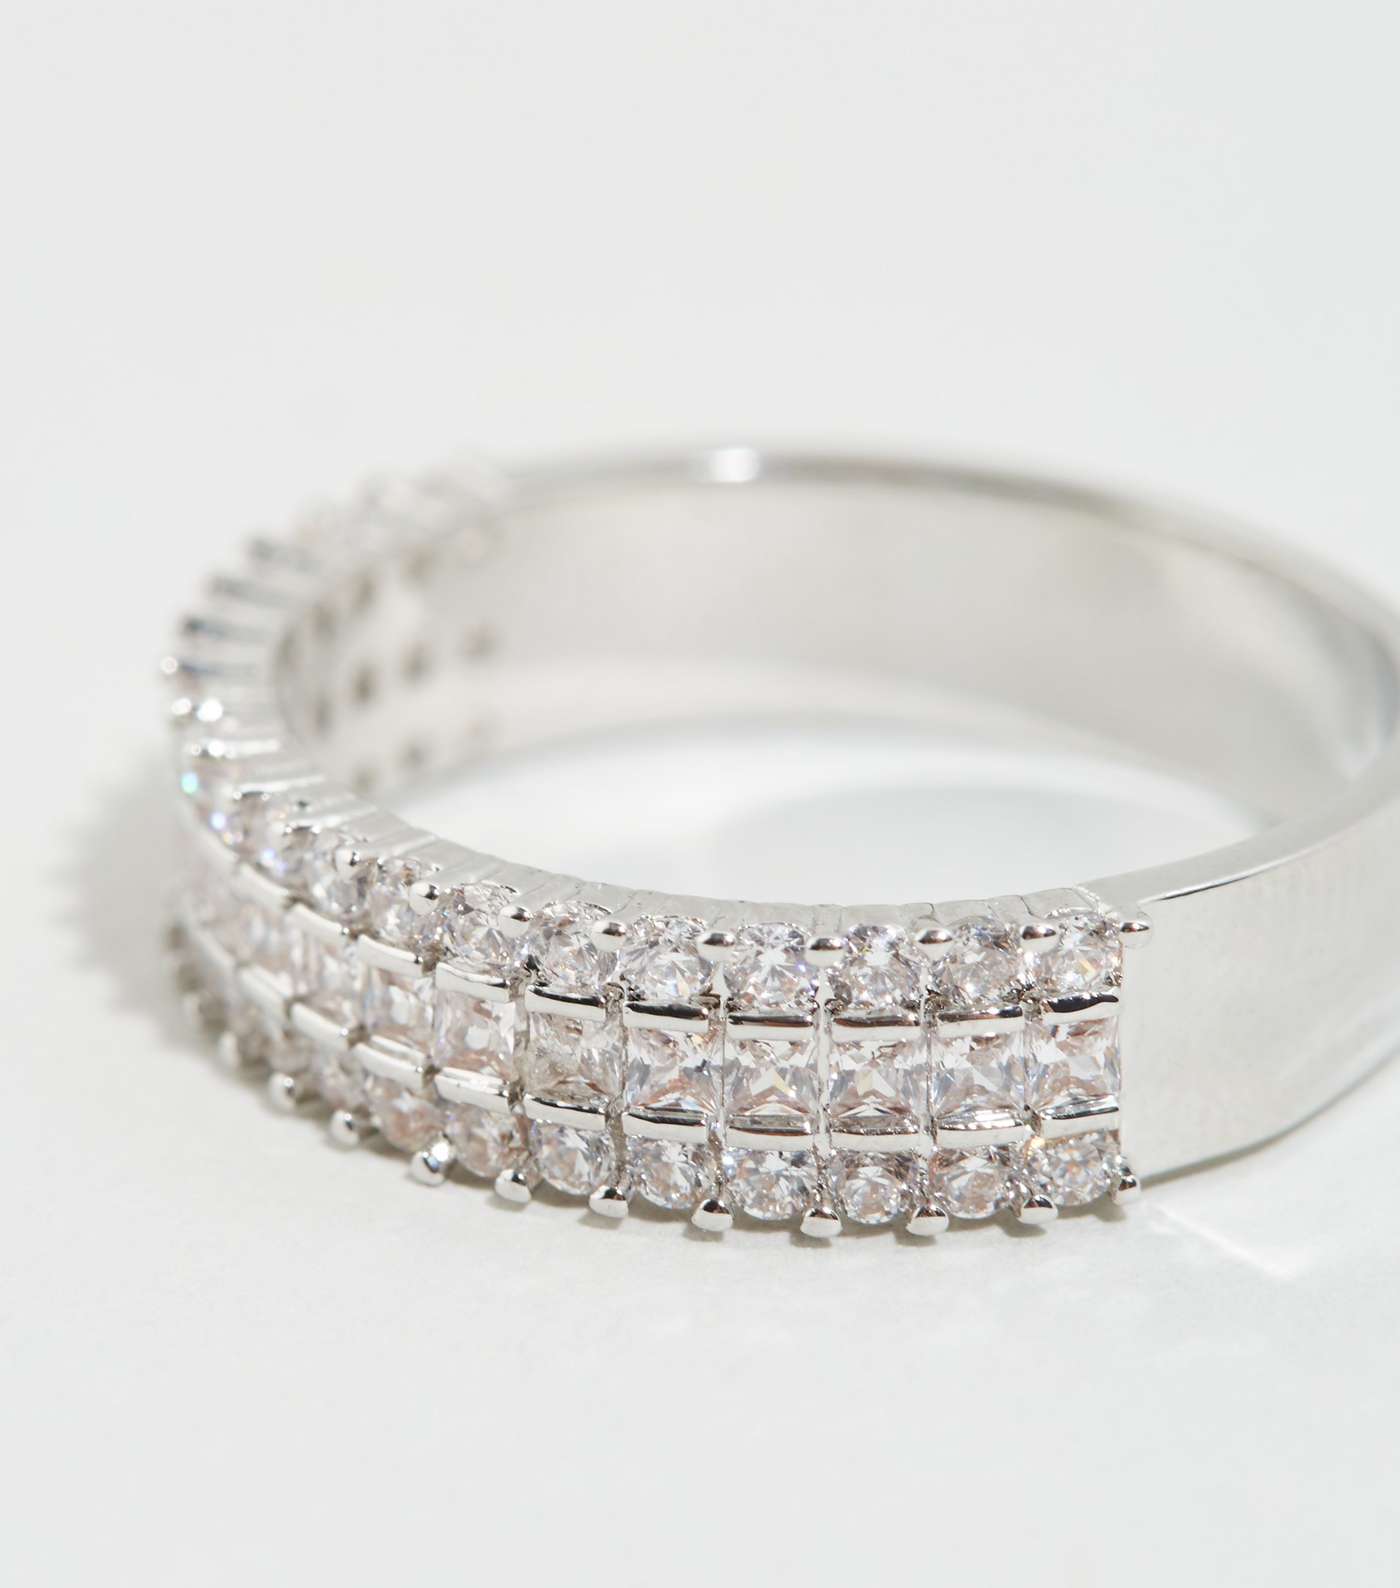 Silver Cubic Zirconia Band Ring Image 2